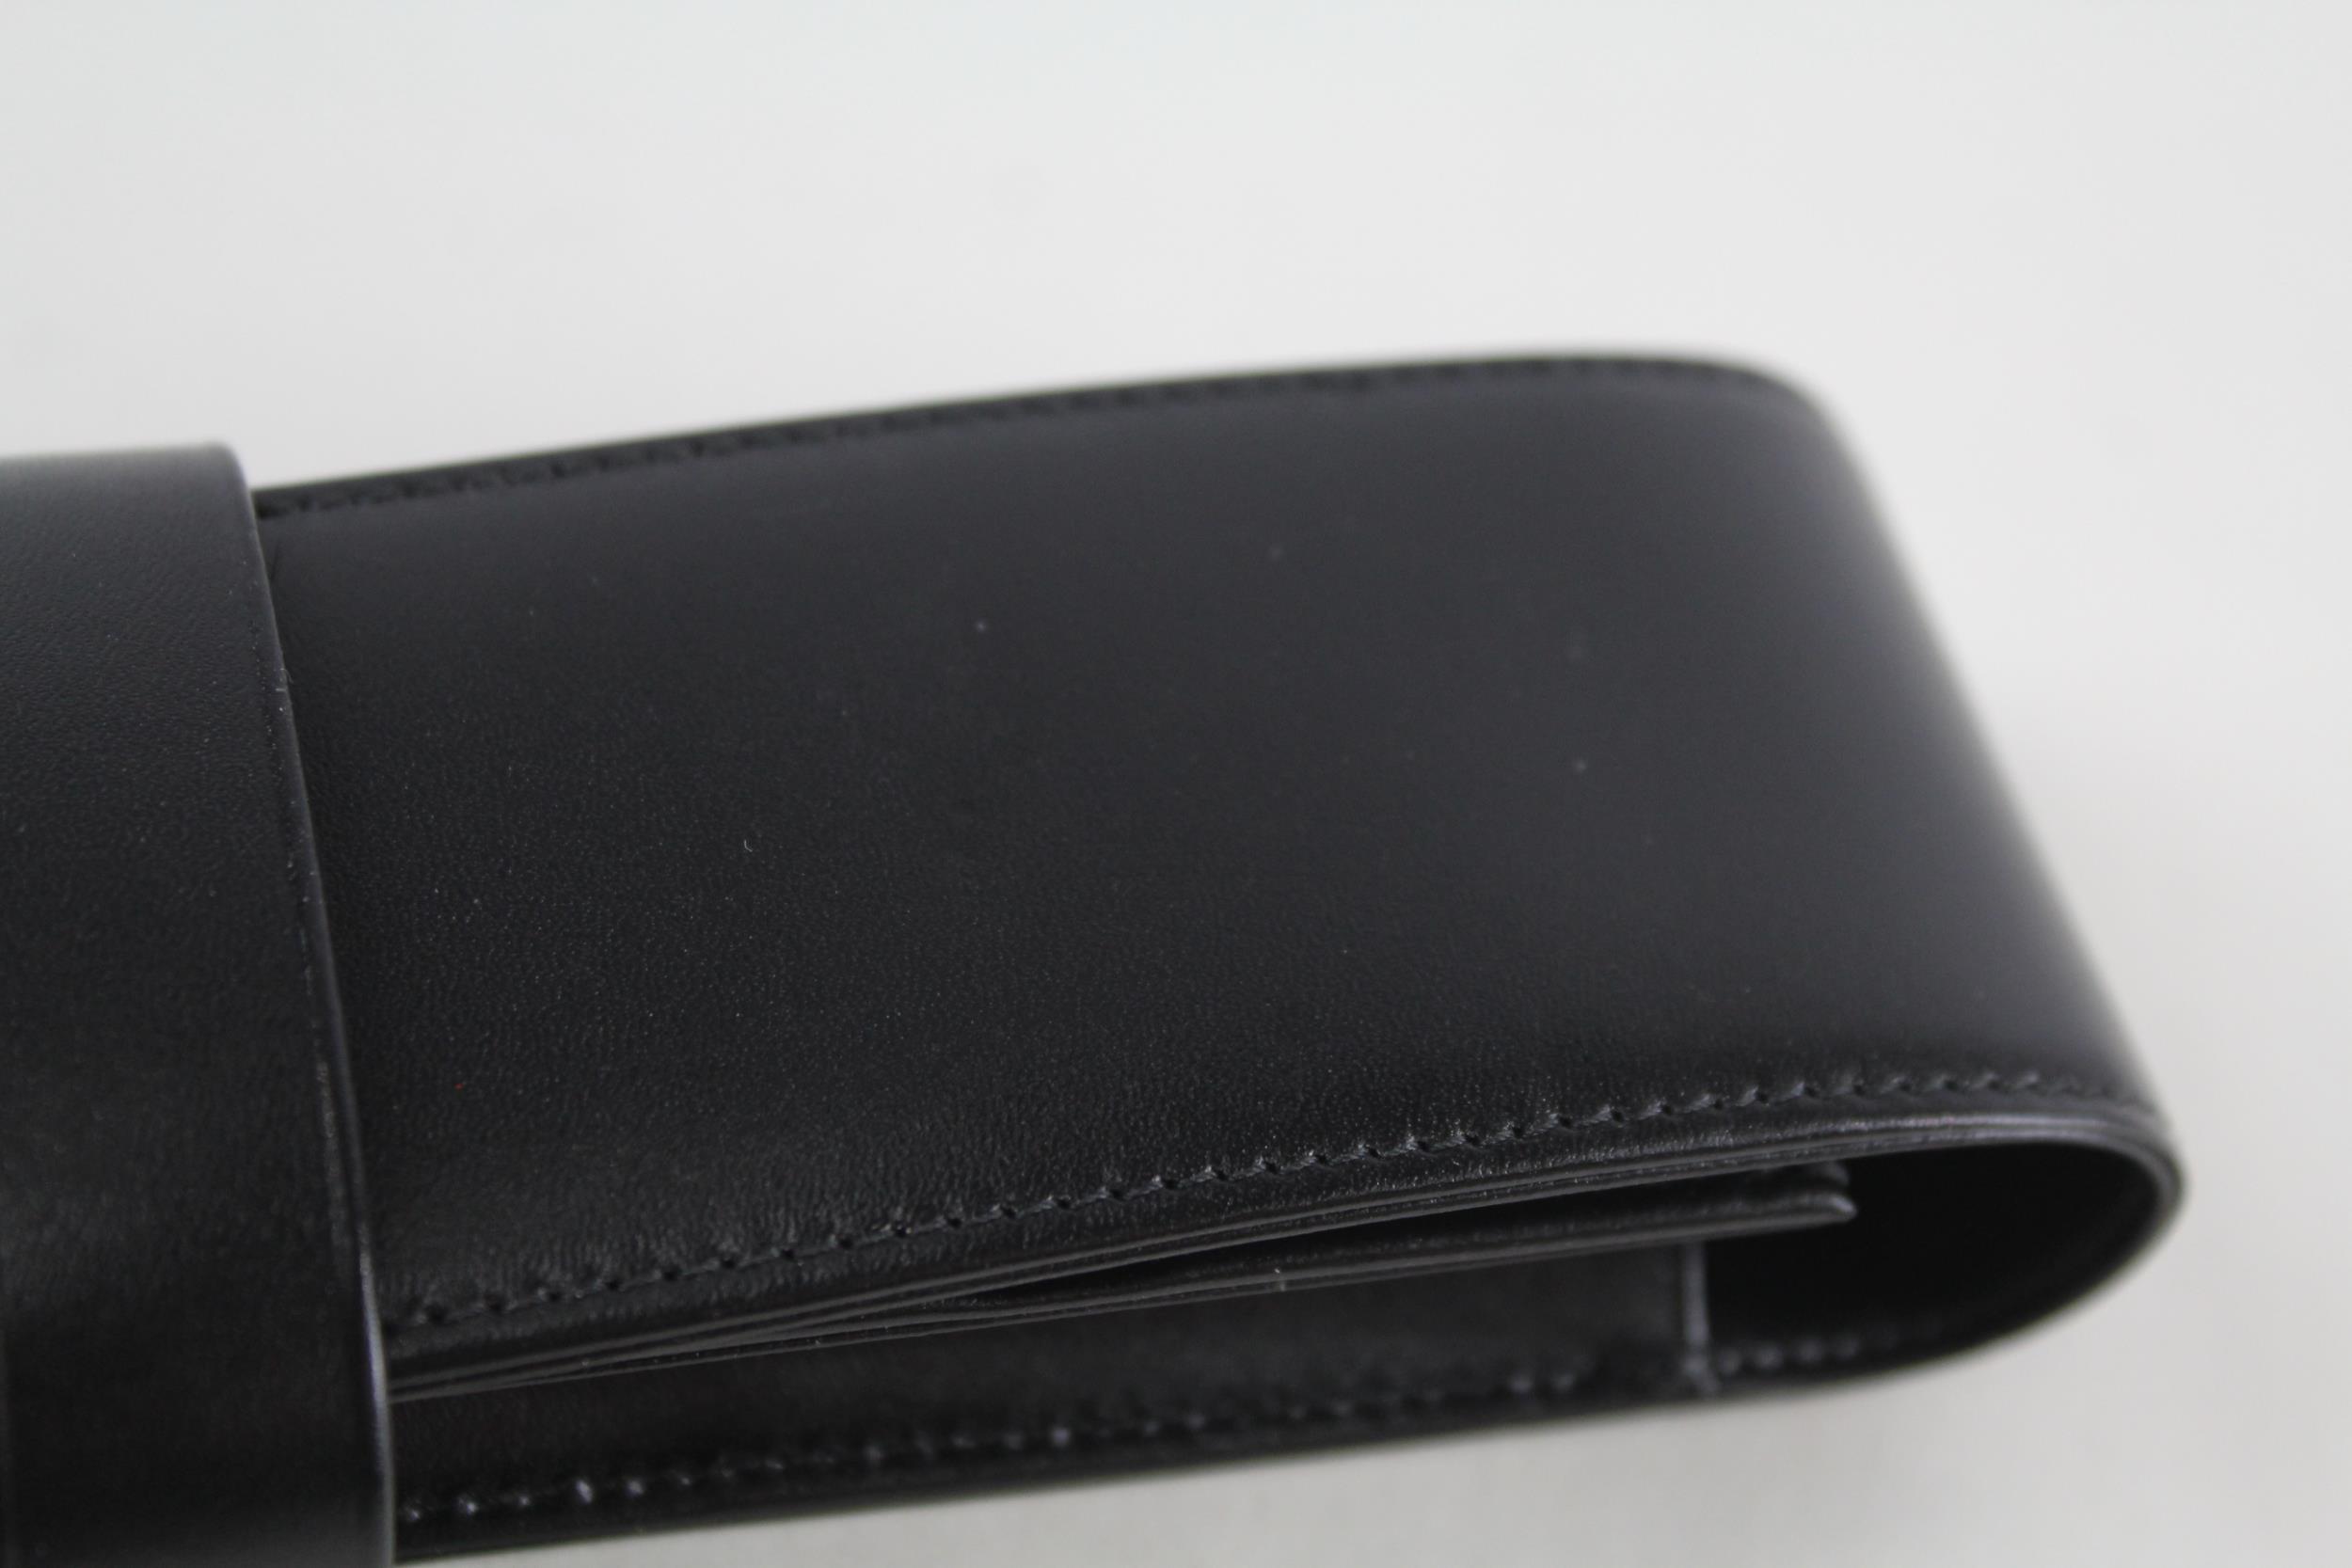 MONTBLANC Meisterstuck Black Leather 2 Compartment Pen Pouch - Dimensions - 4.5cm(w) x 17cm(h) In - Image 3 of 5